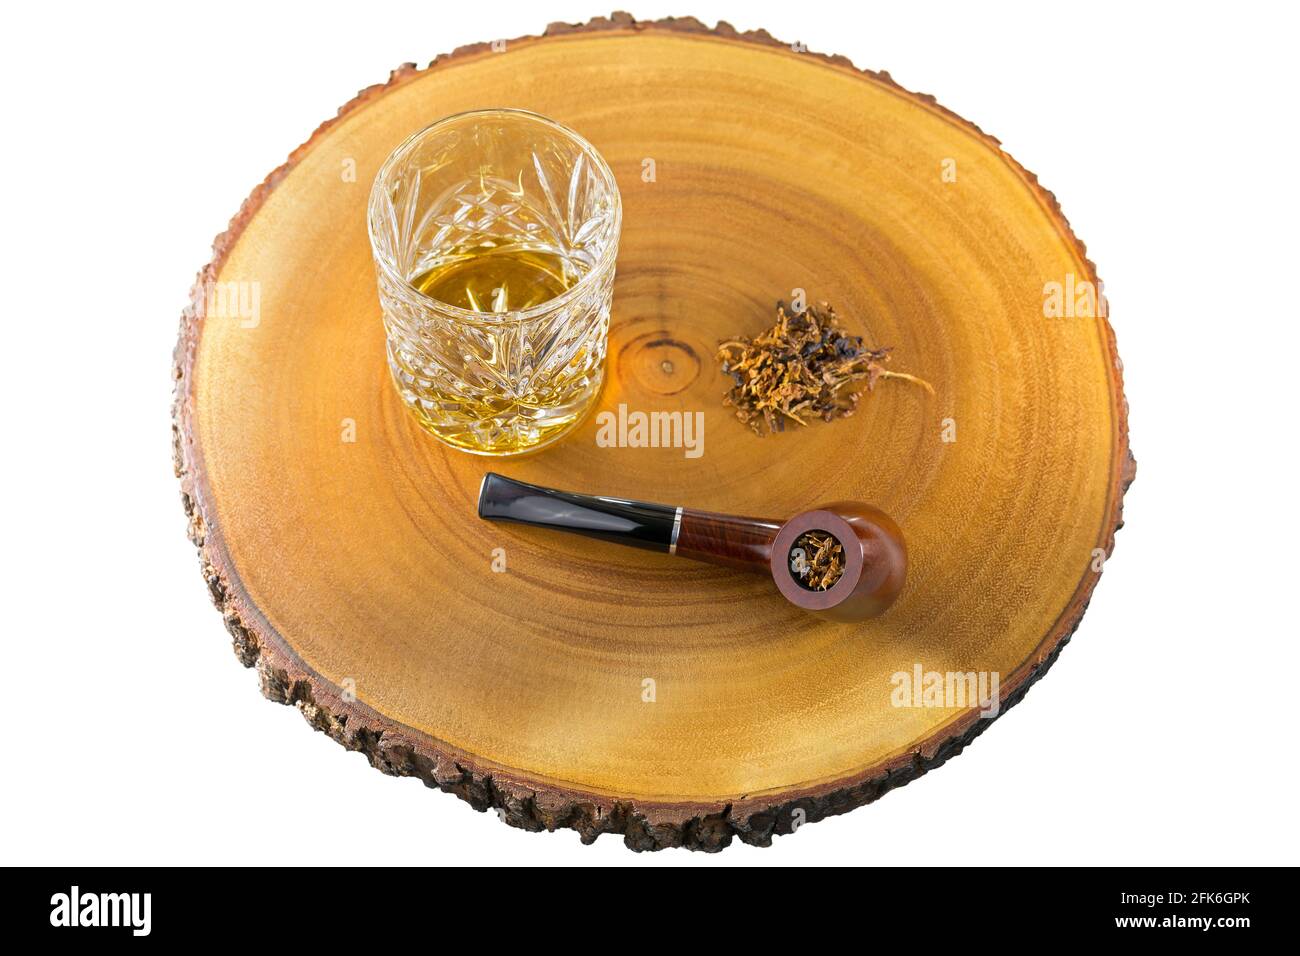 Glass of single malt scotch whisky next to aromatic pipe tobacco on wood isolated on white background Stock Photo